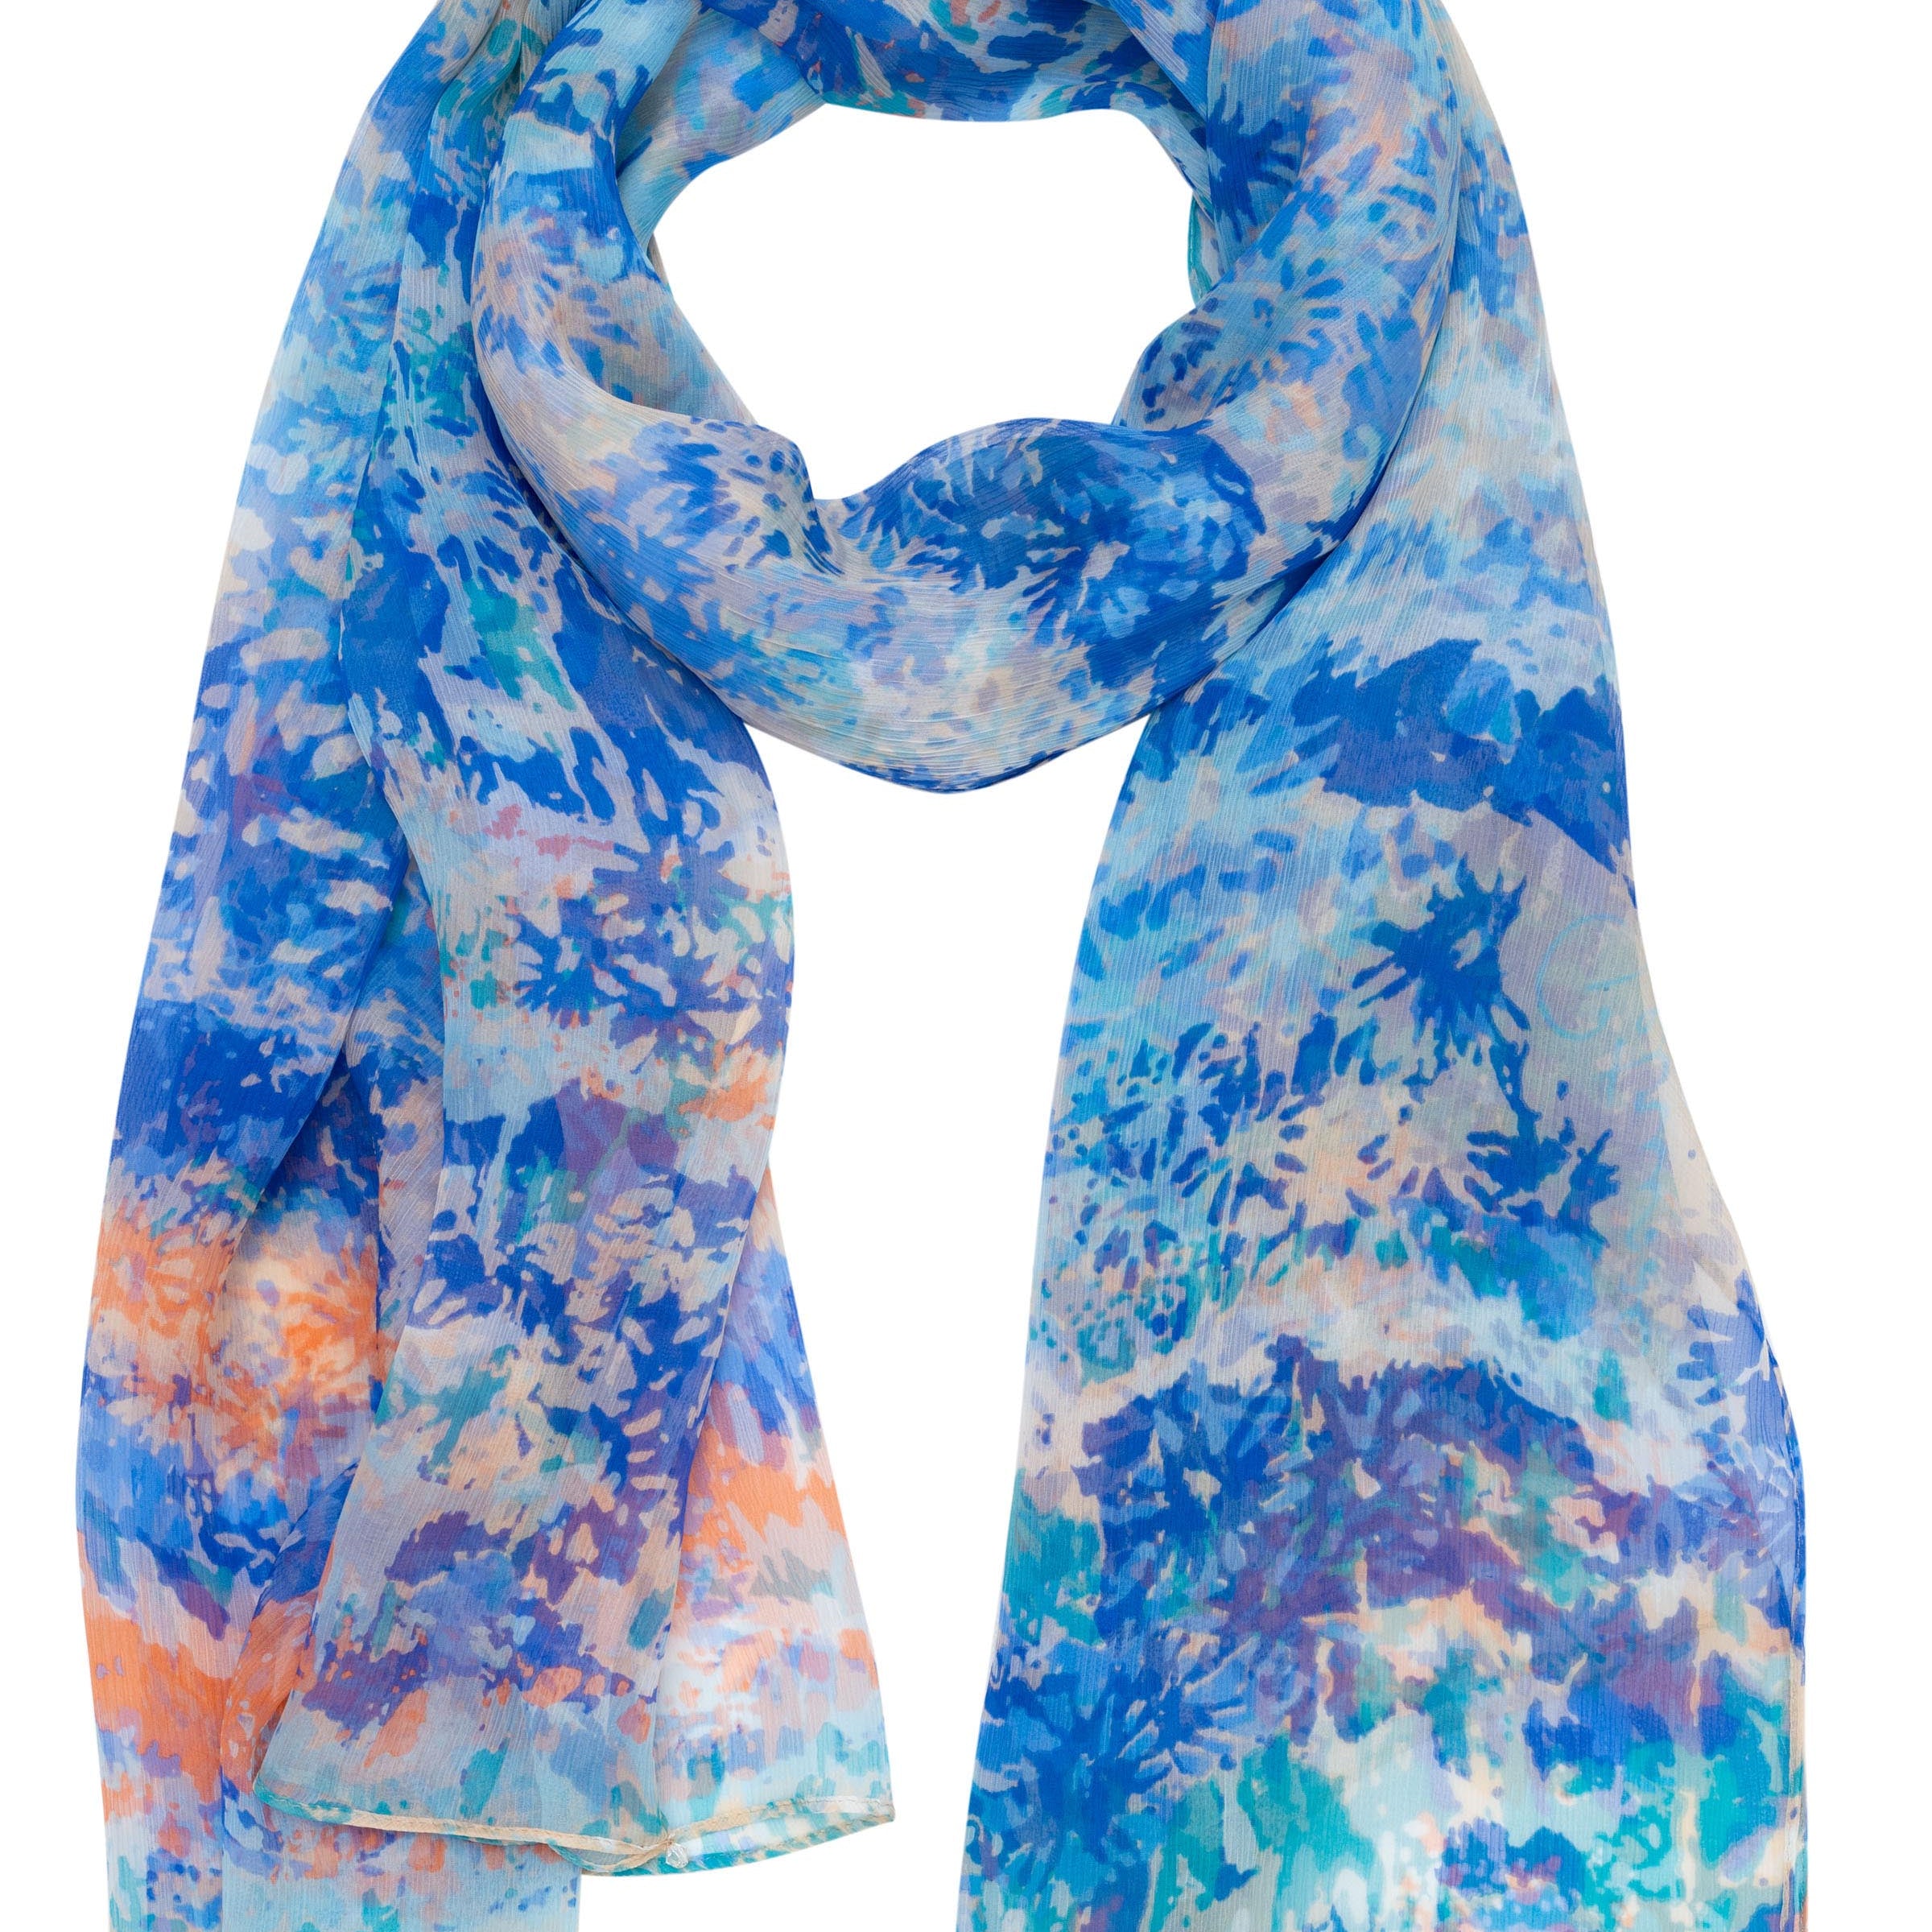 Petrusse Rosee blue shawl tied